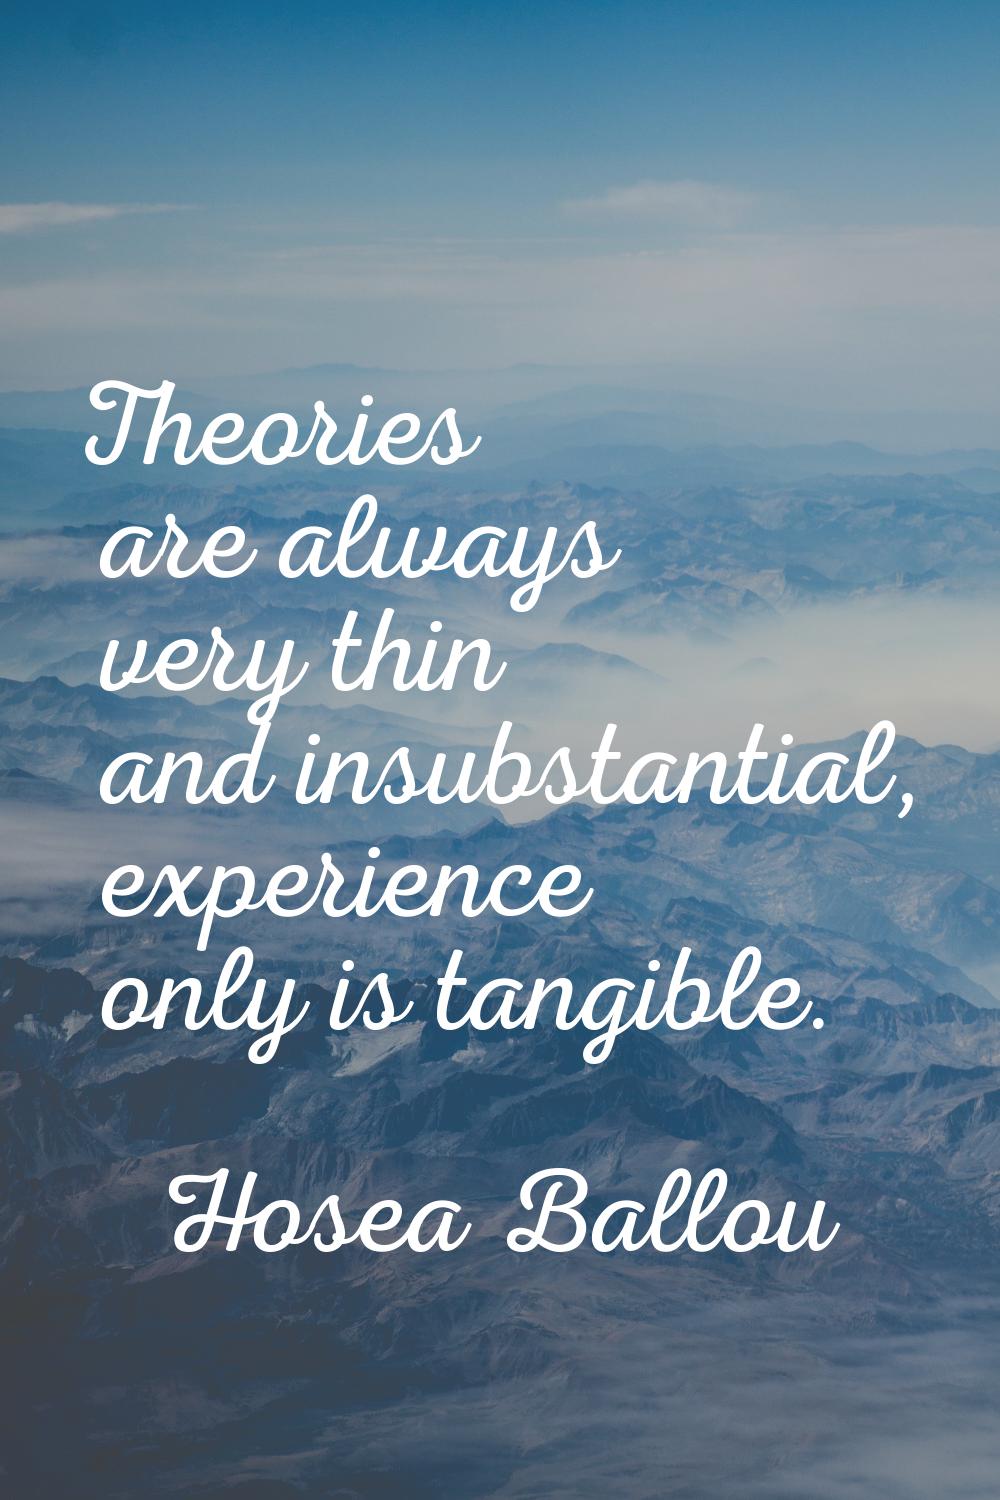 Theories are always very thin and insubstantial, experience only is tangible.